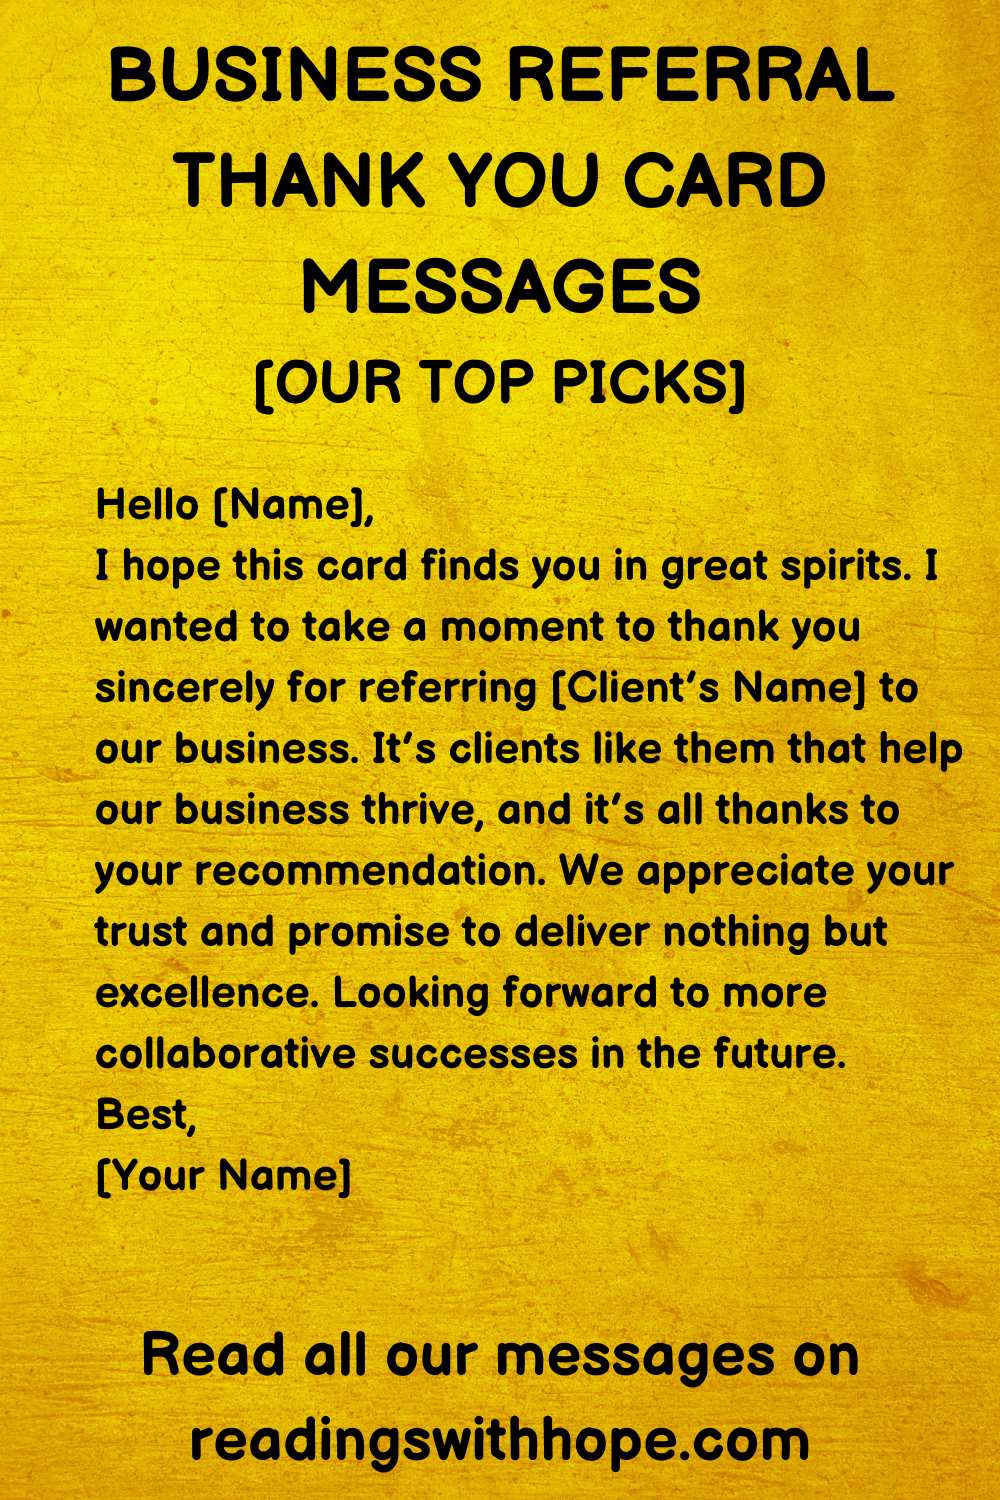 Business Referral Thank You Card Messages
